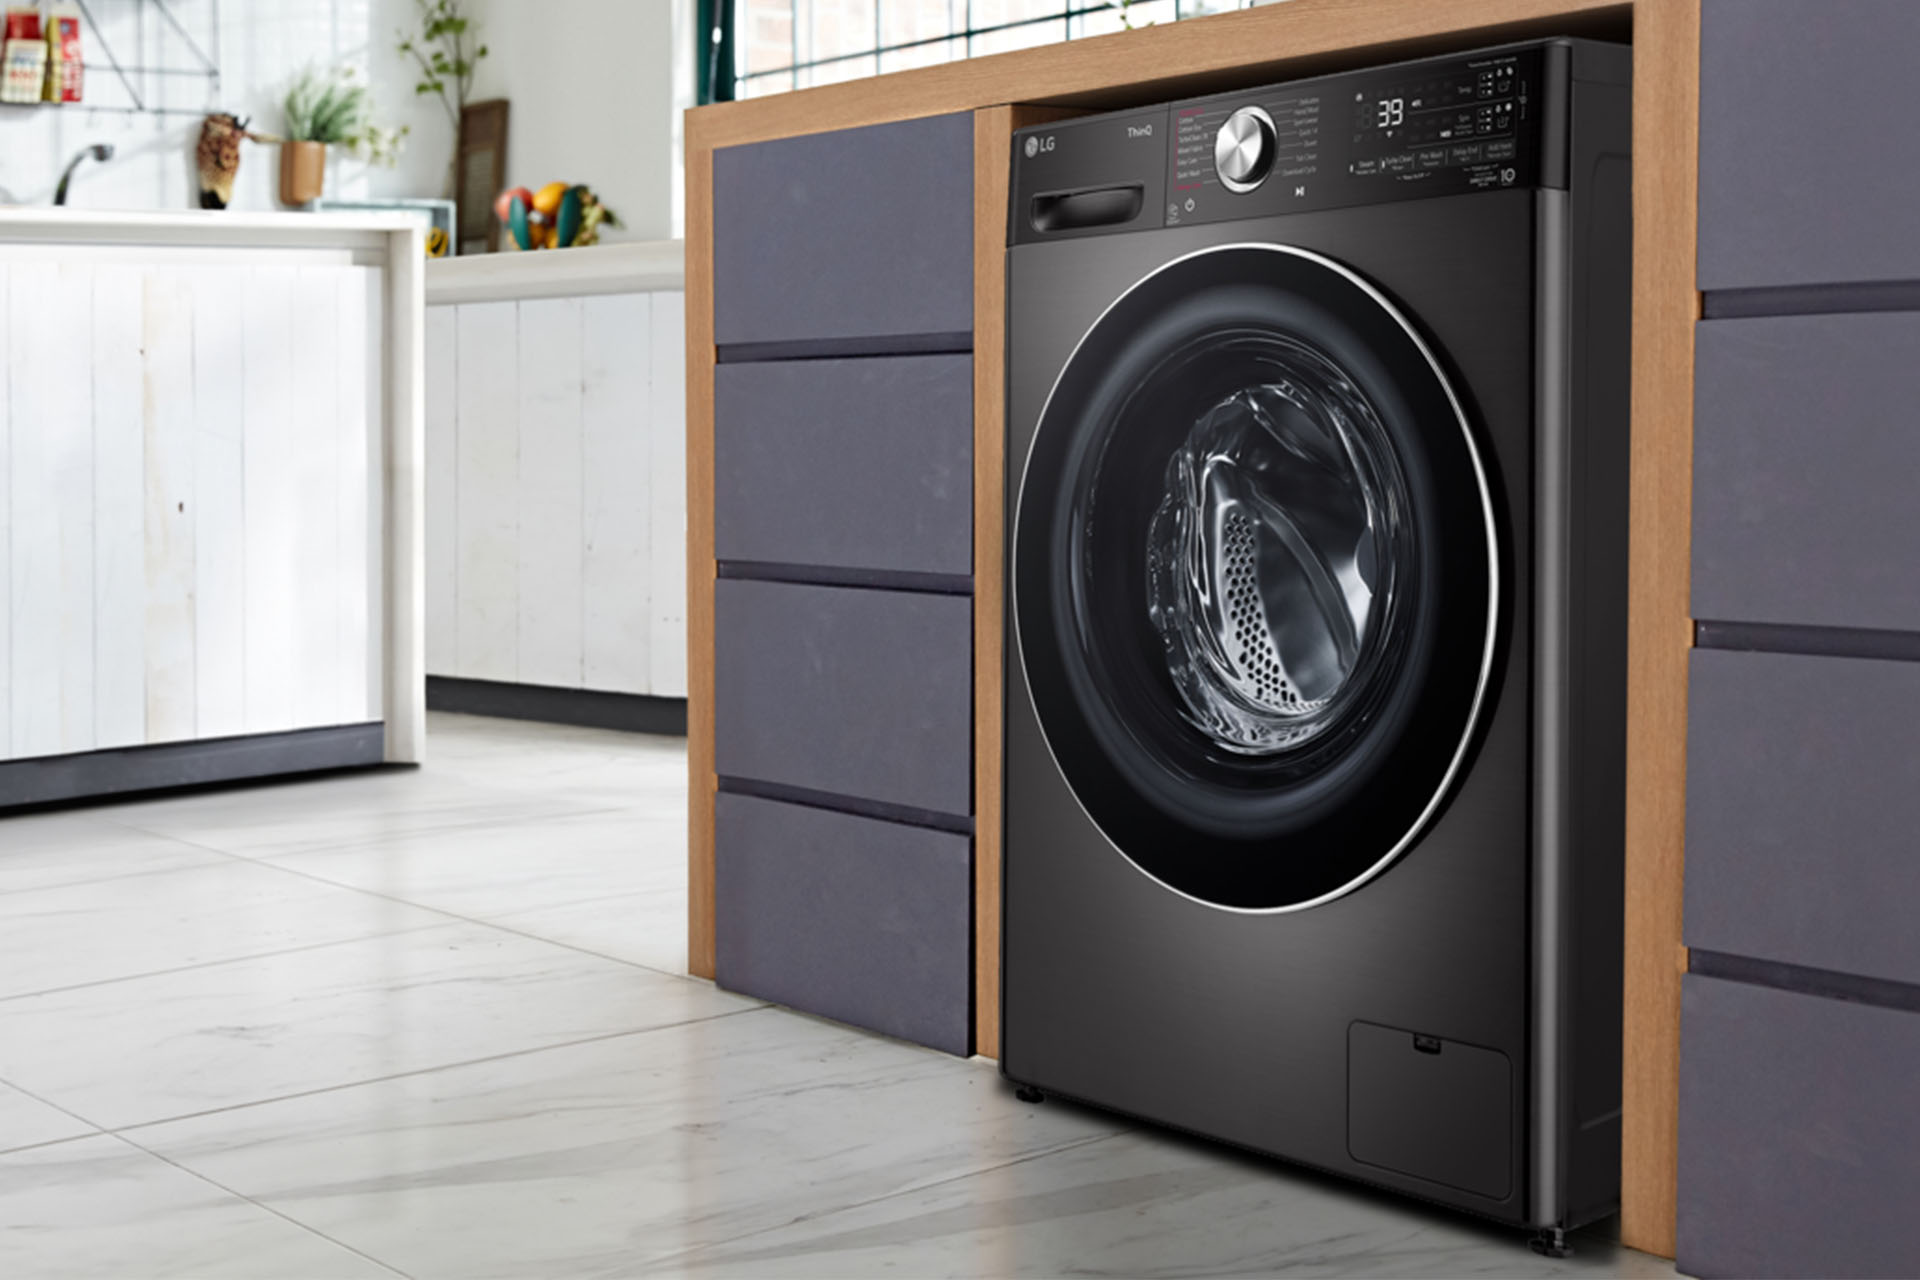 How To Fix The Error Code F2 For LG Washing Machine